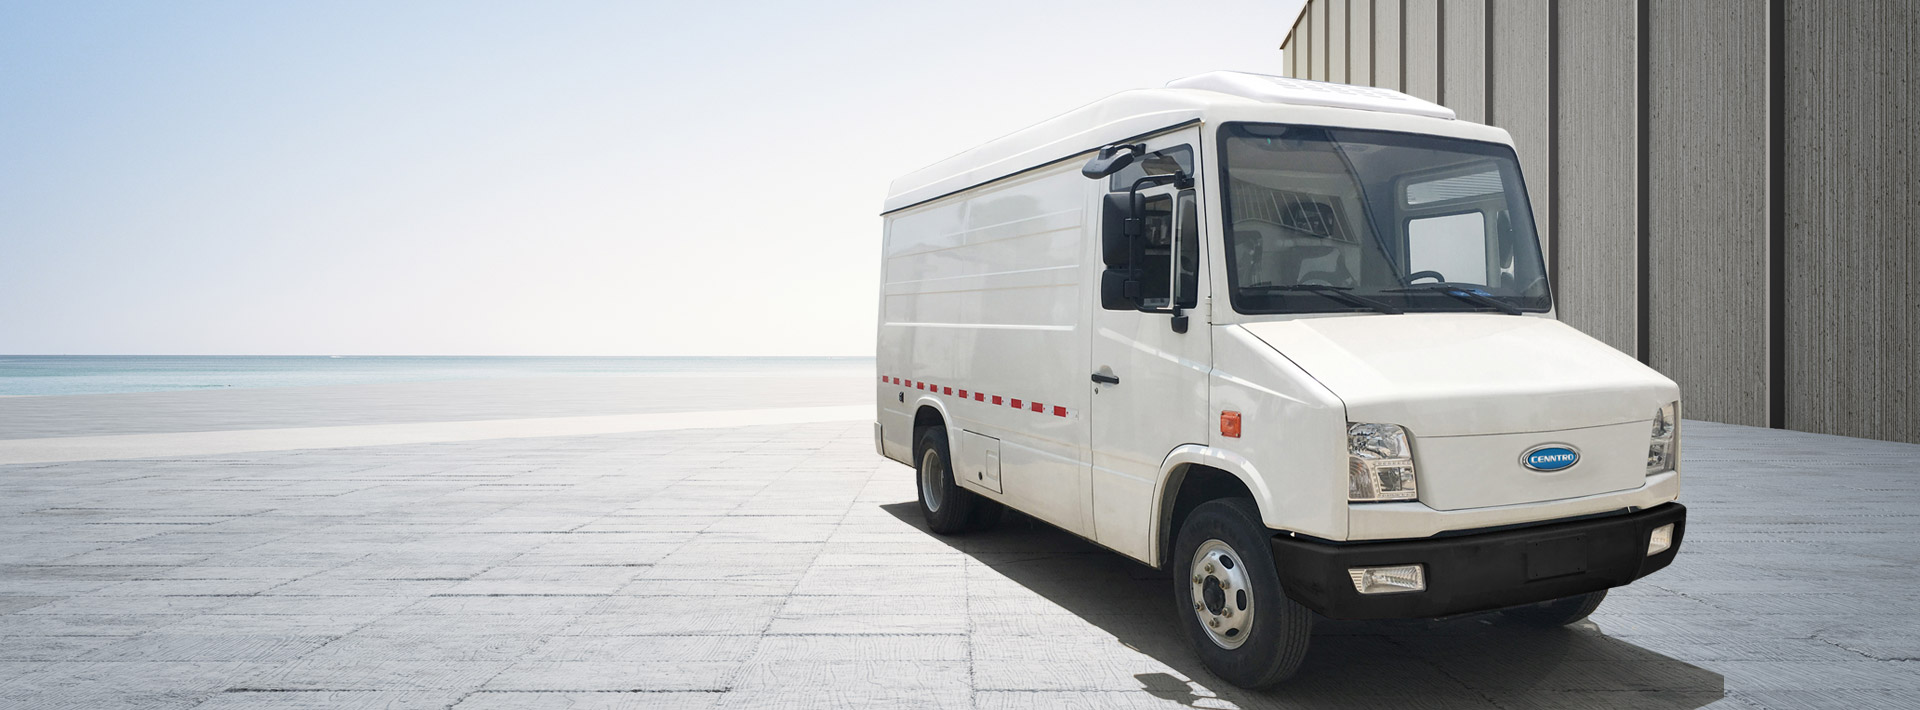 Logistar 400 electric vehicle